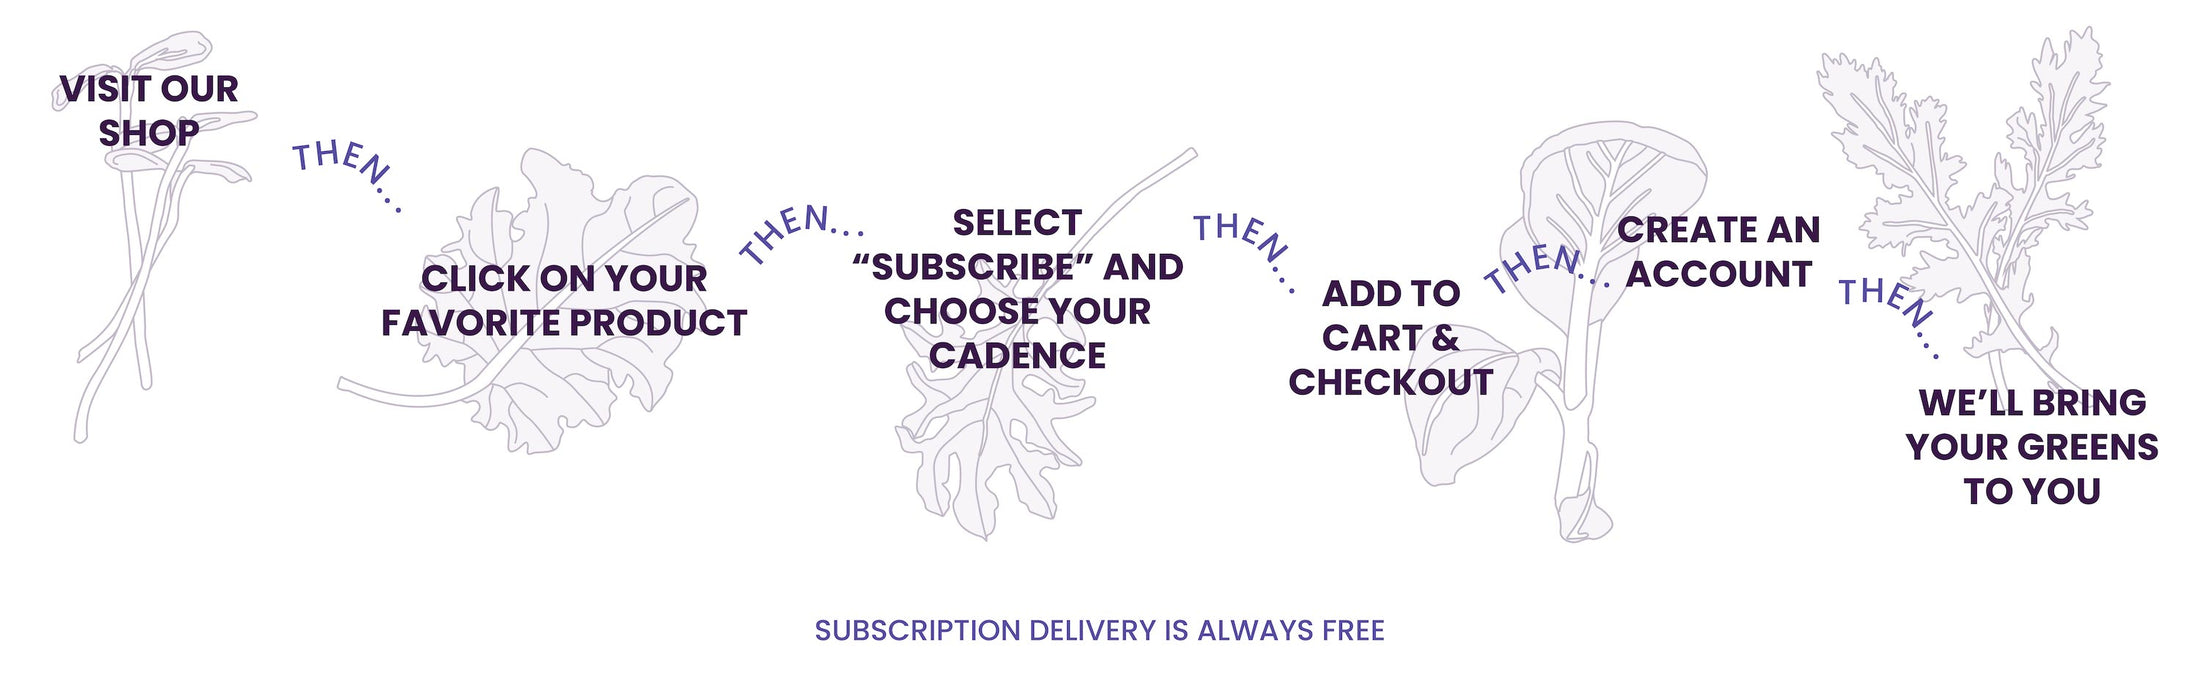 Visit our shop, click on your favorite product, select subscribe and choose your cadence, add to cart & checkout, create an account, we'll bring your greens to you. Subscription delivery is always free.